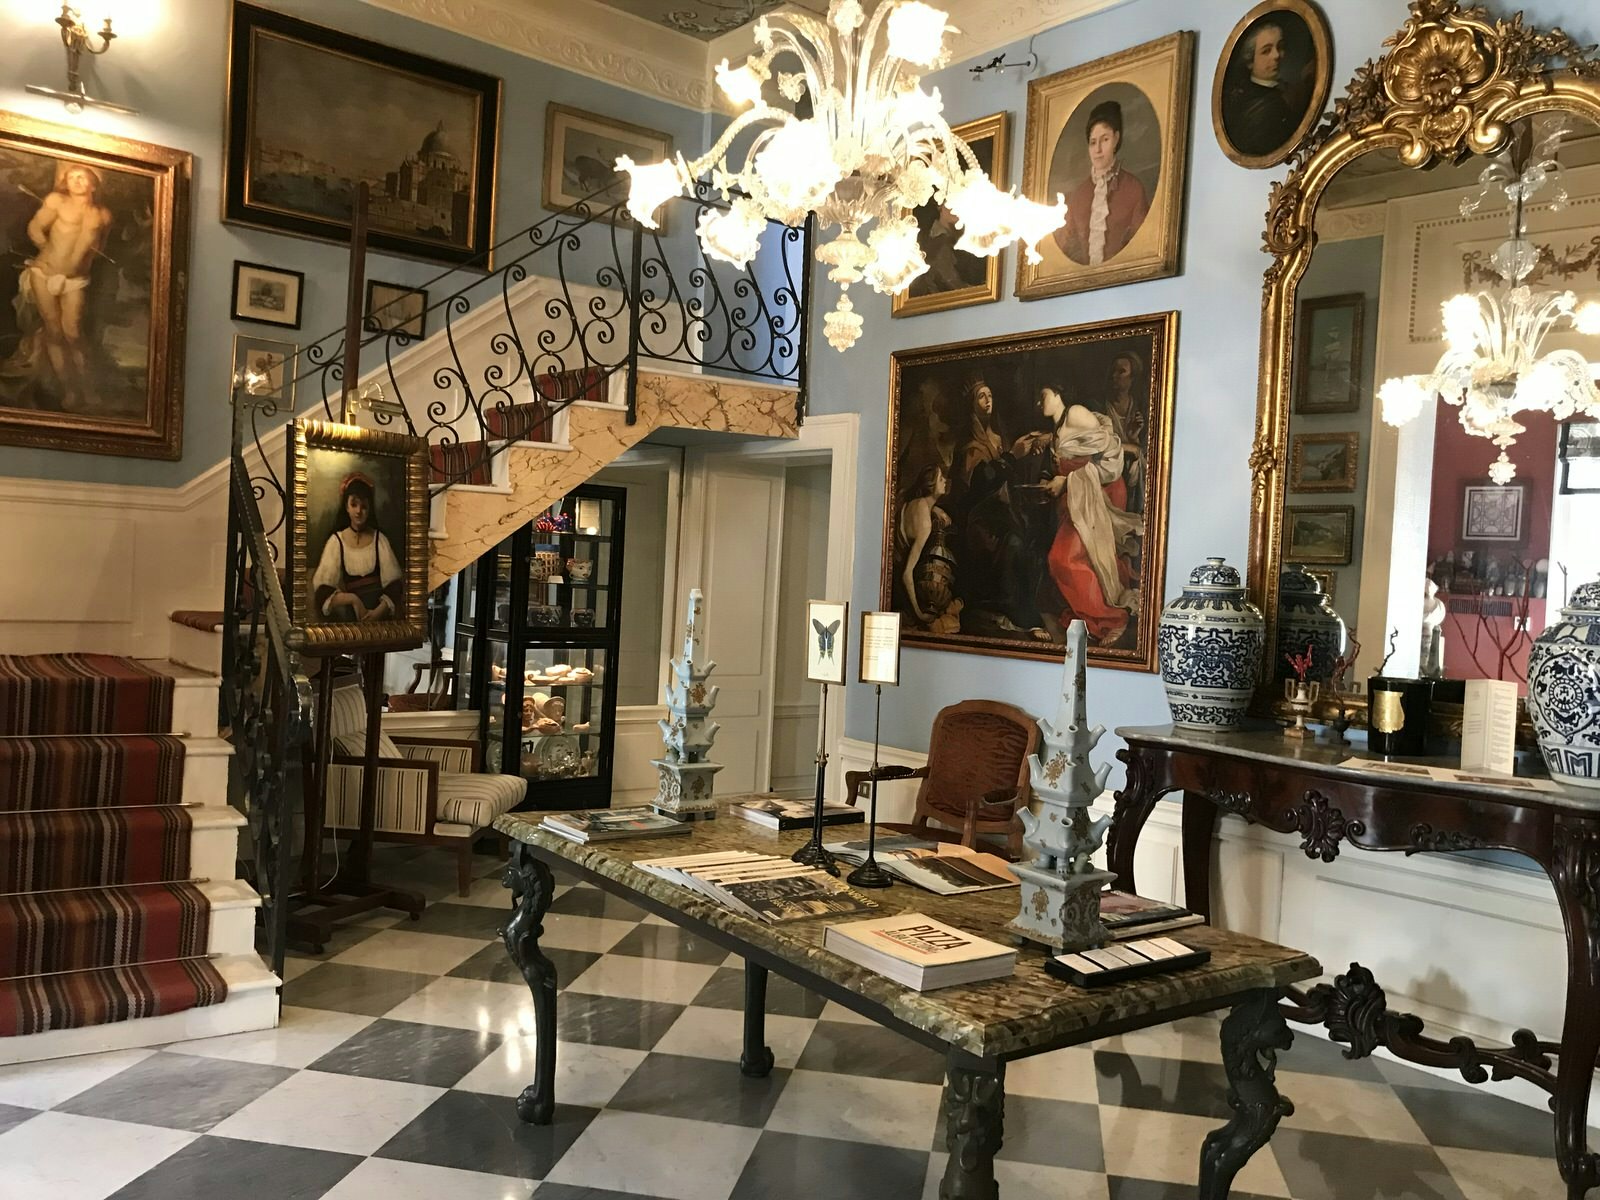 The entrance hall of Casa D'Anna, decorated with paintings and period furniture